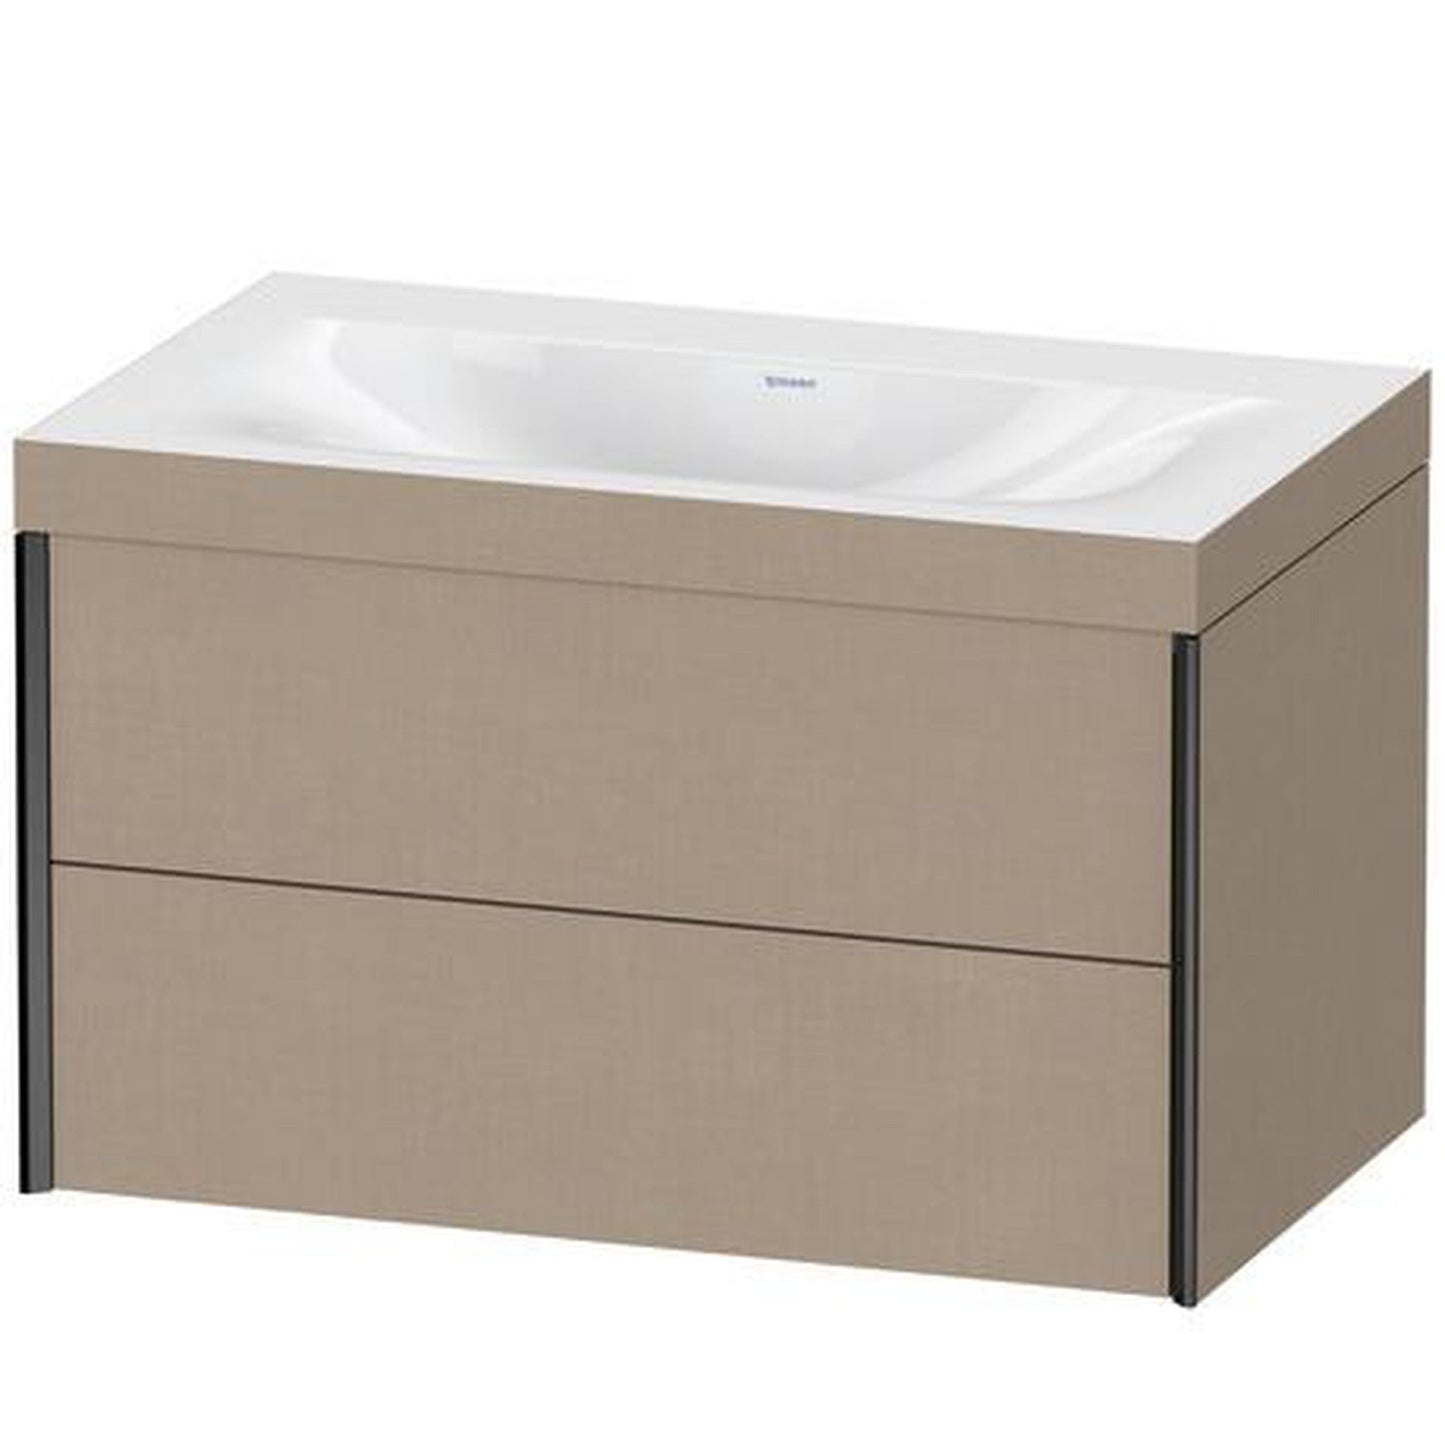 Duravit Xviu 31" x 20" x 19" Two Drawer C-Bonded Wall-Mount Vanity Kit Without Tap Hole, Linen (XV4615NB275C)